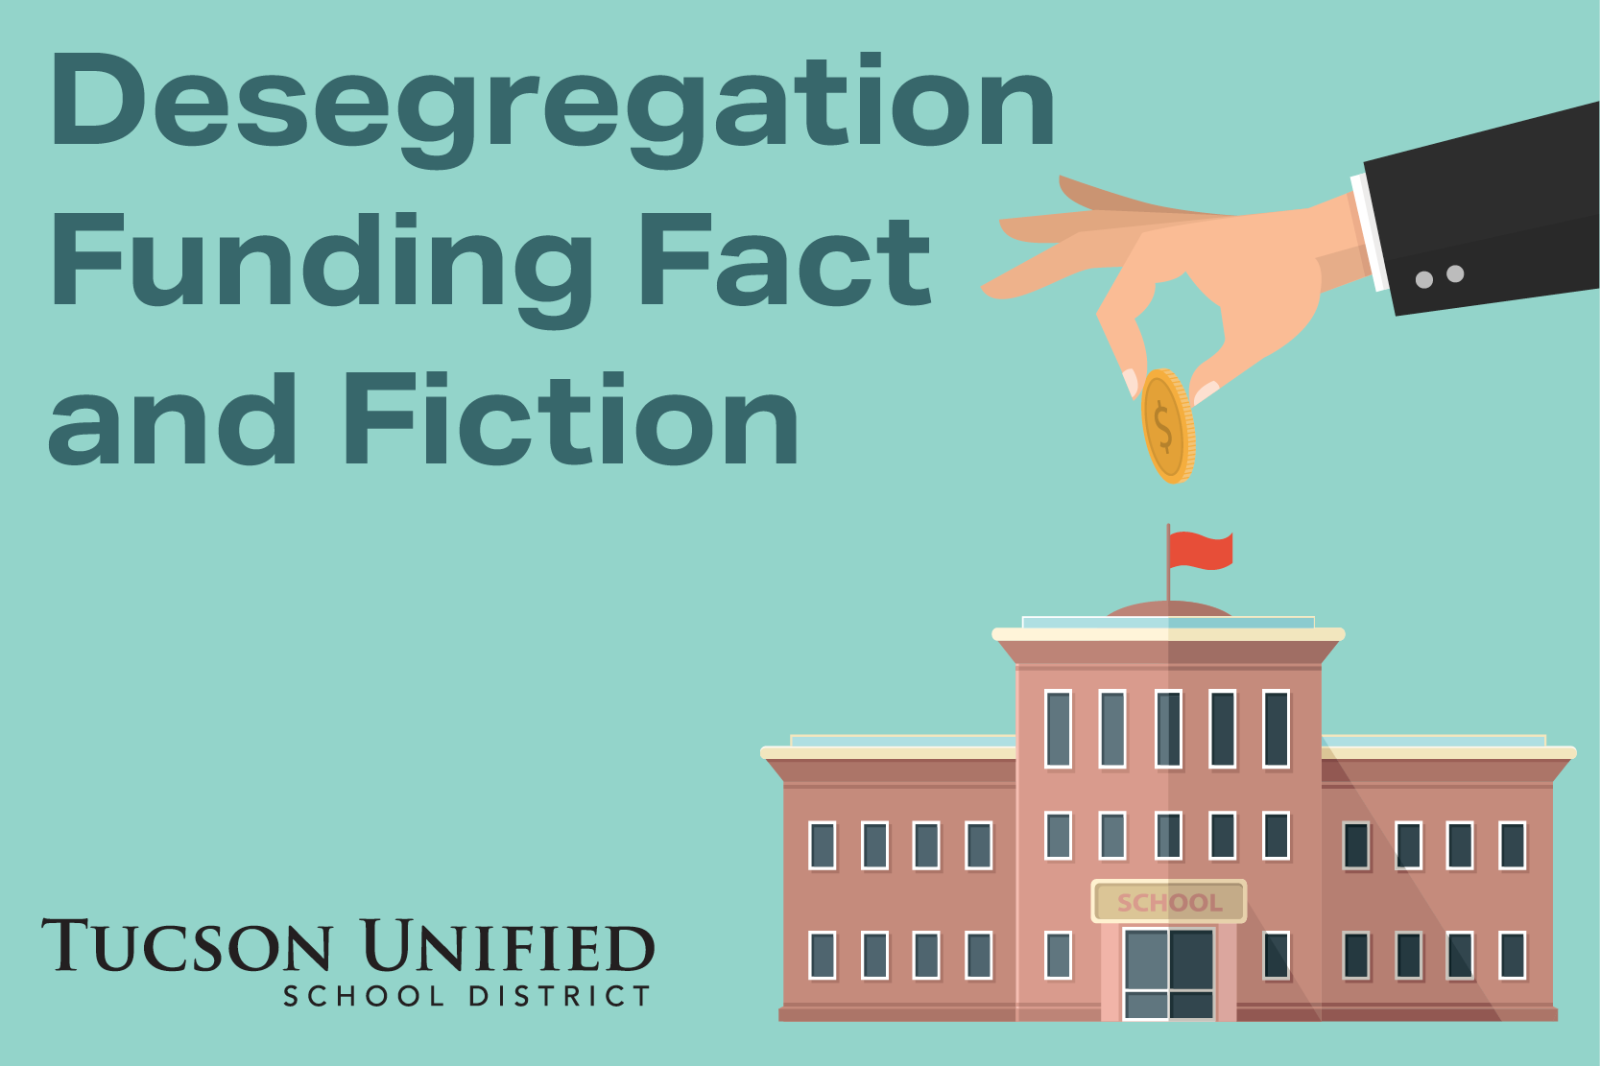 Desegregation Funding Fact and Fiction